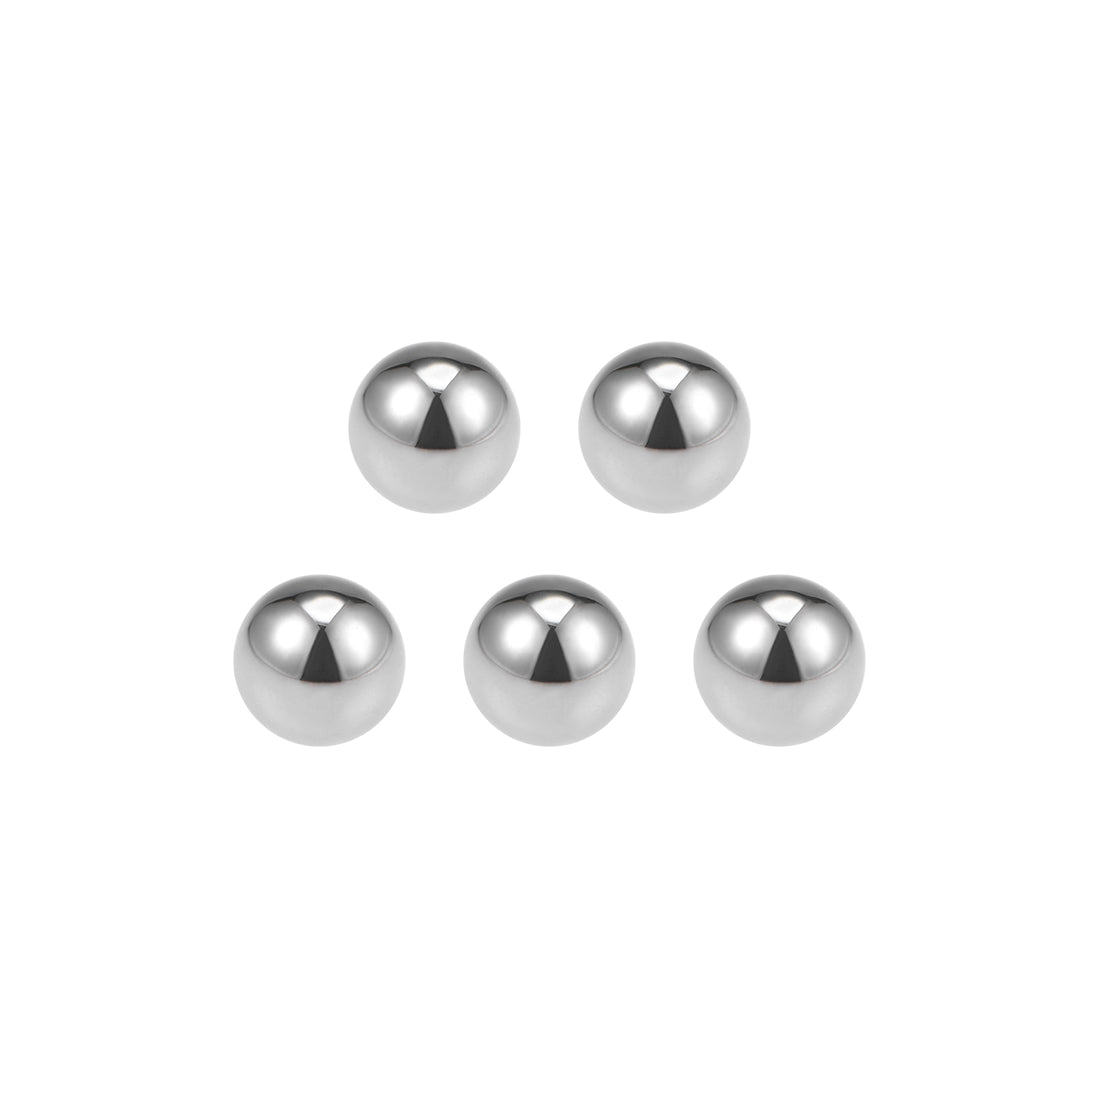 uxcell Uxcell Precision Balls 1/2" Solid Chrome Steel G10 for Ball Bearing Wheel 5pcs